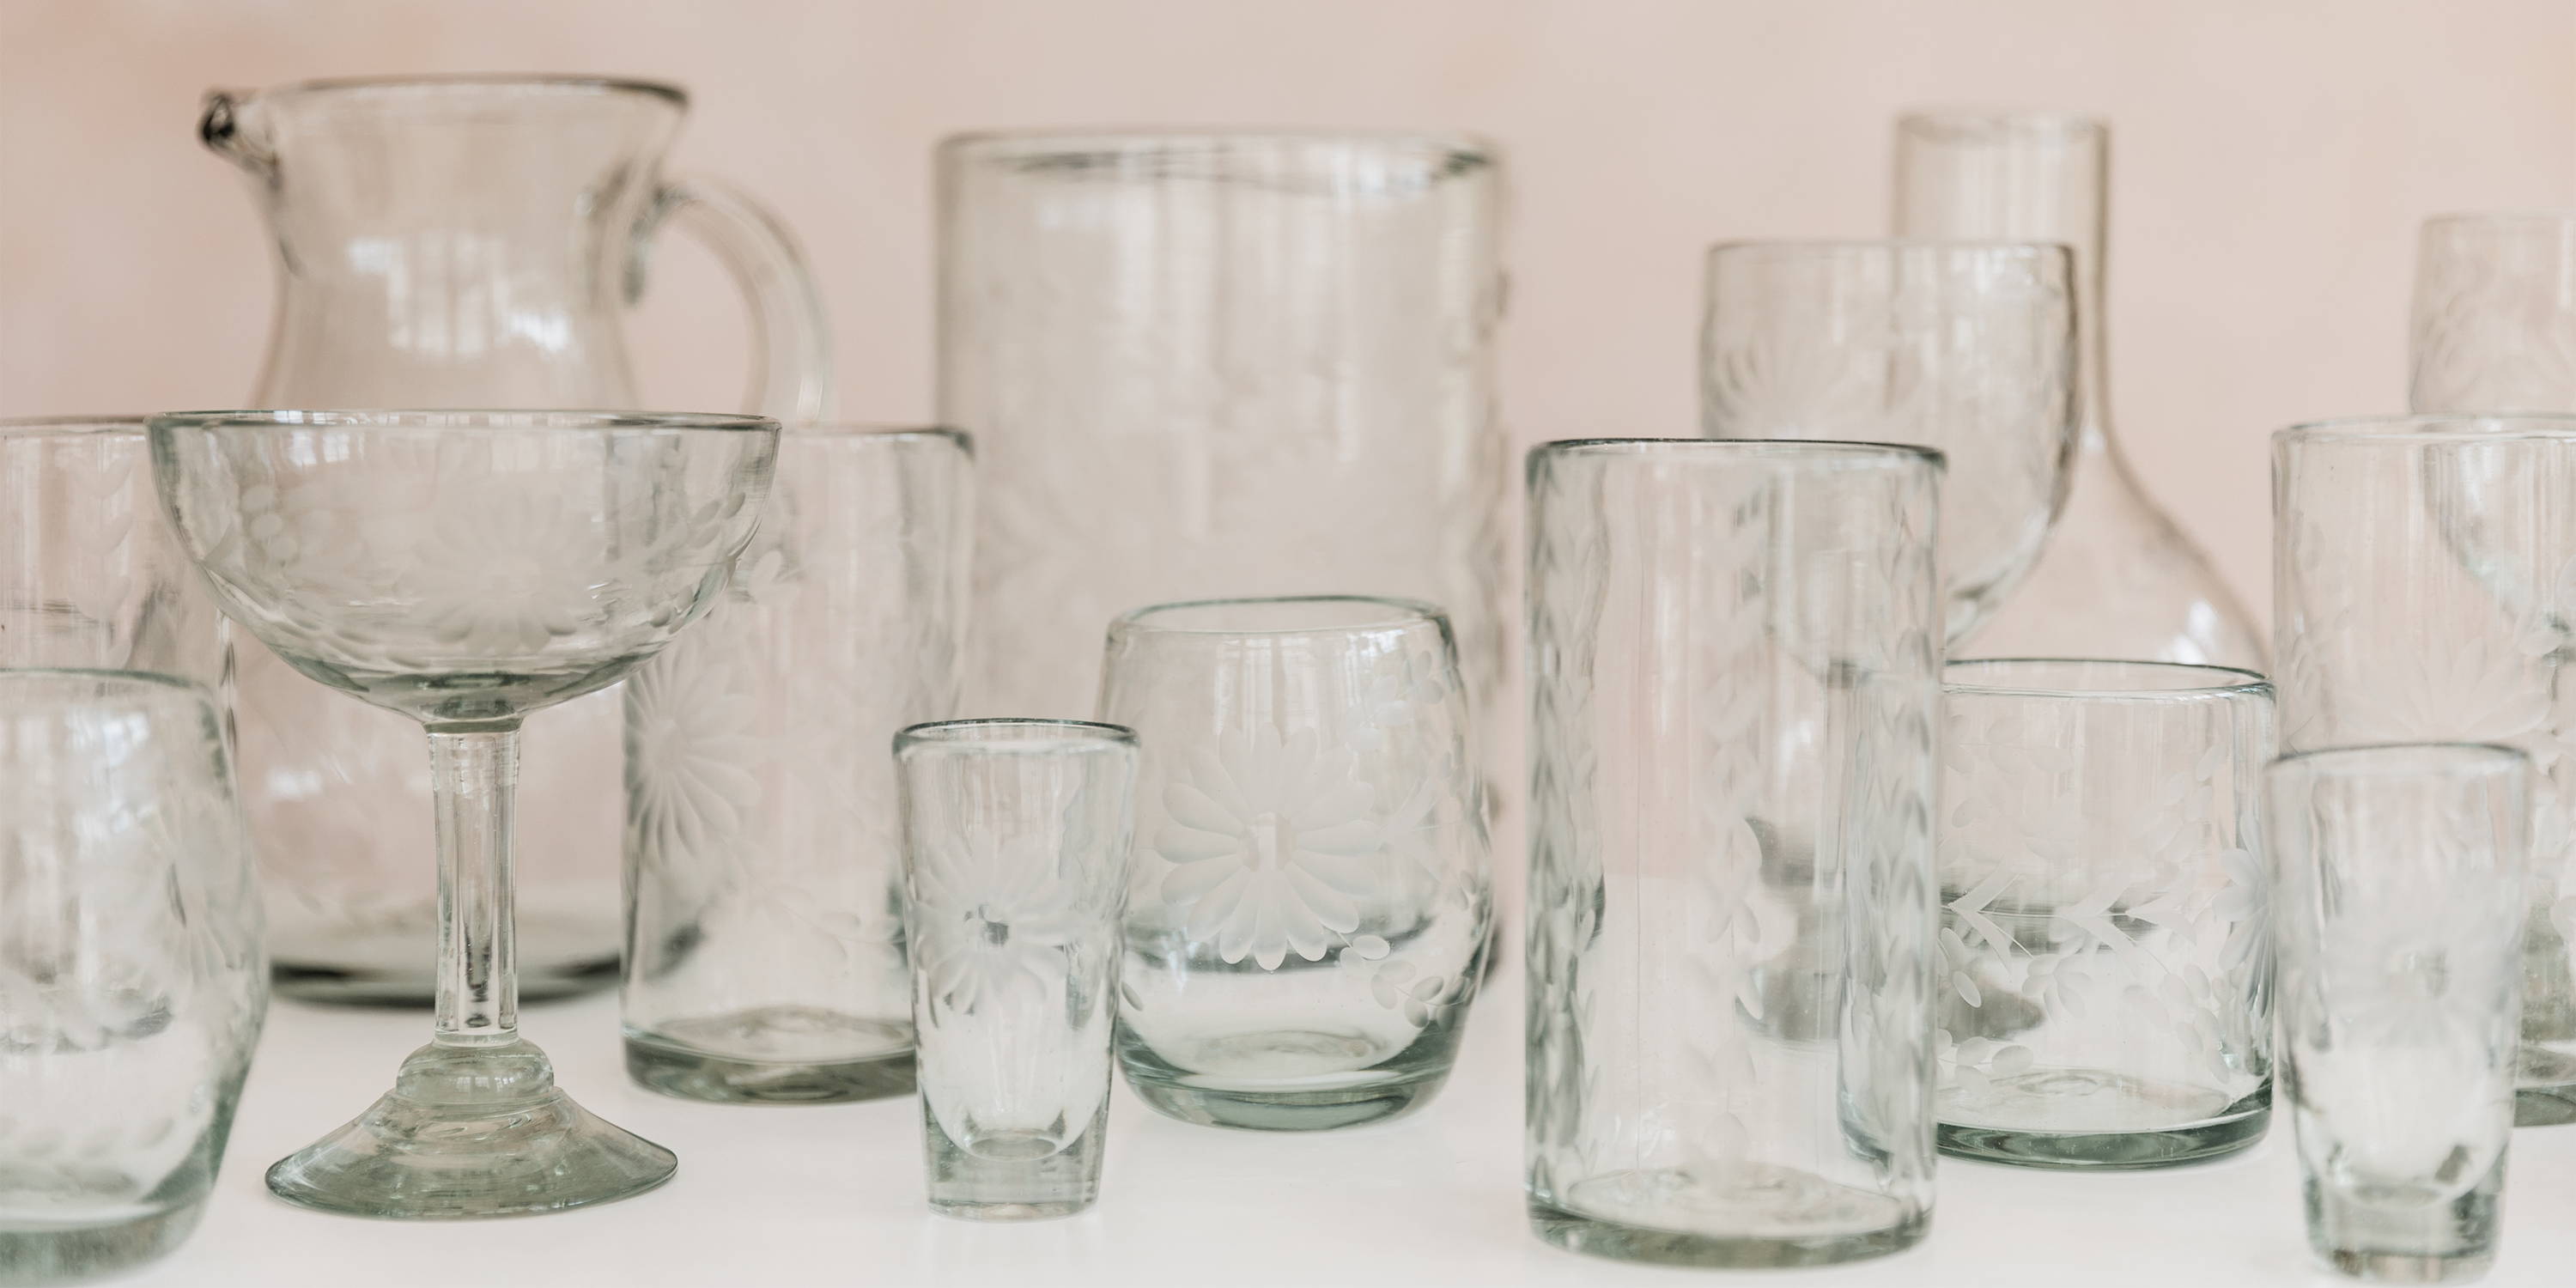  Behind-the-Scenes: Hand-Etched Glassware Made in Mexico | The Little Market